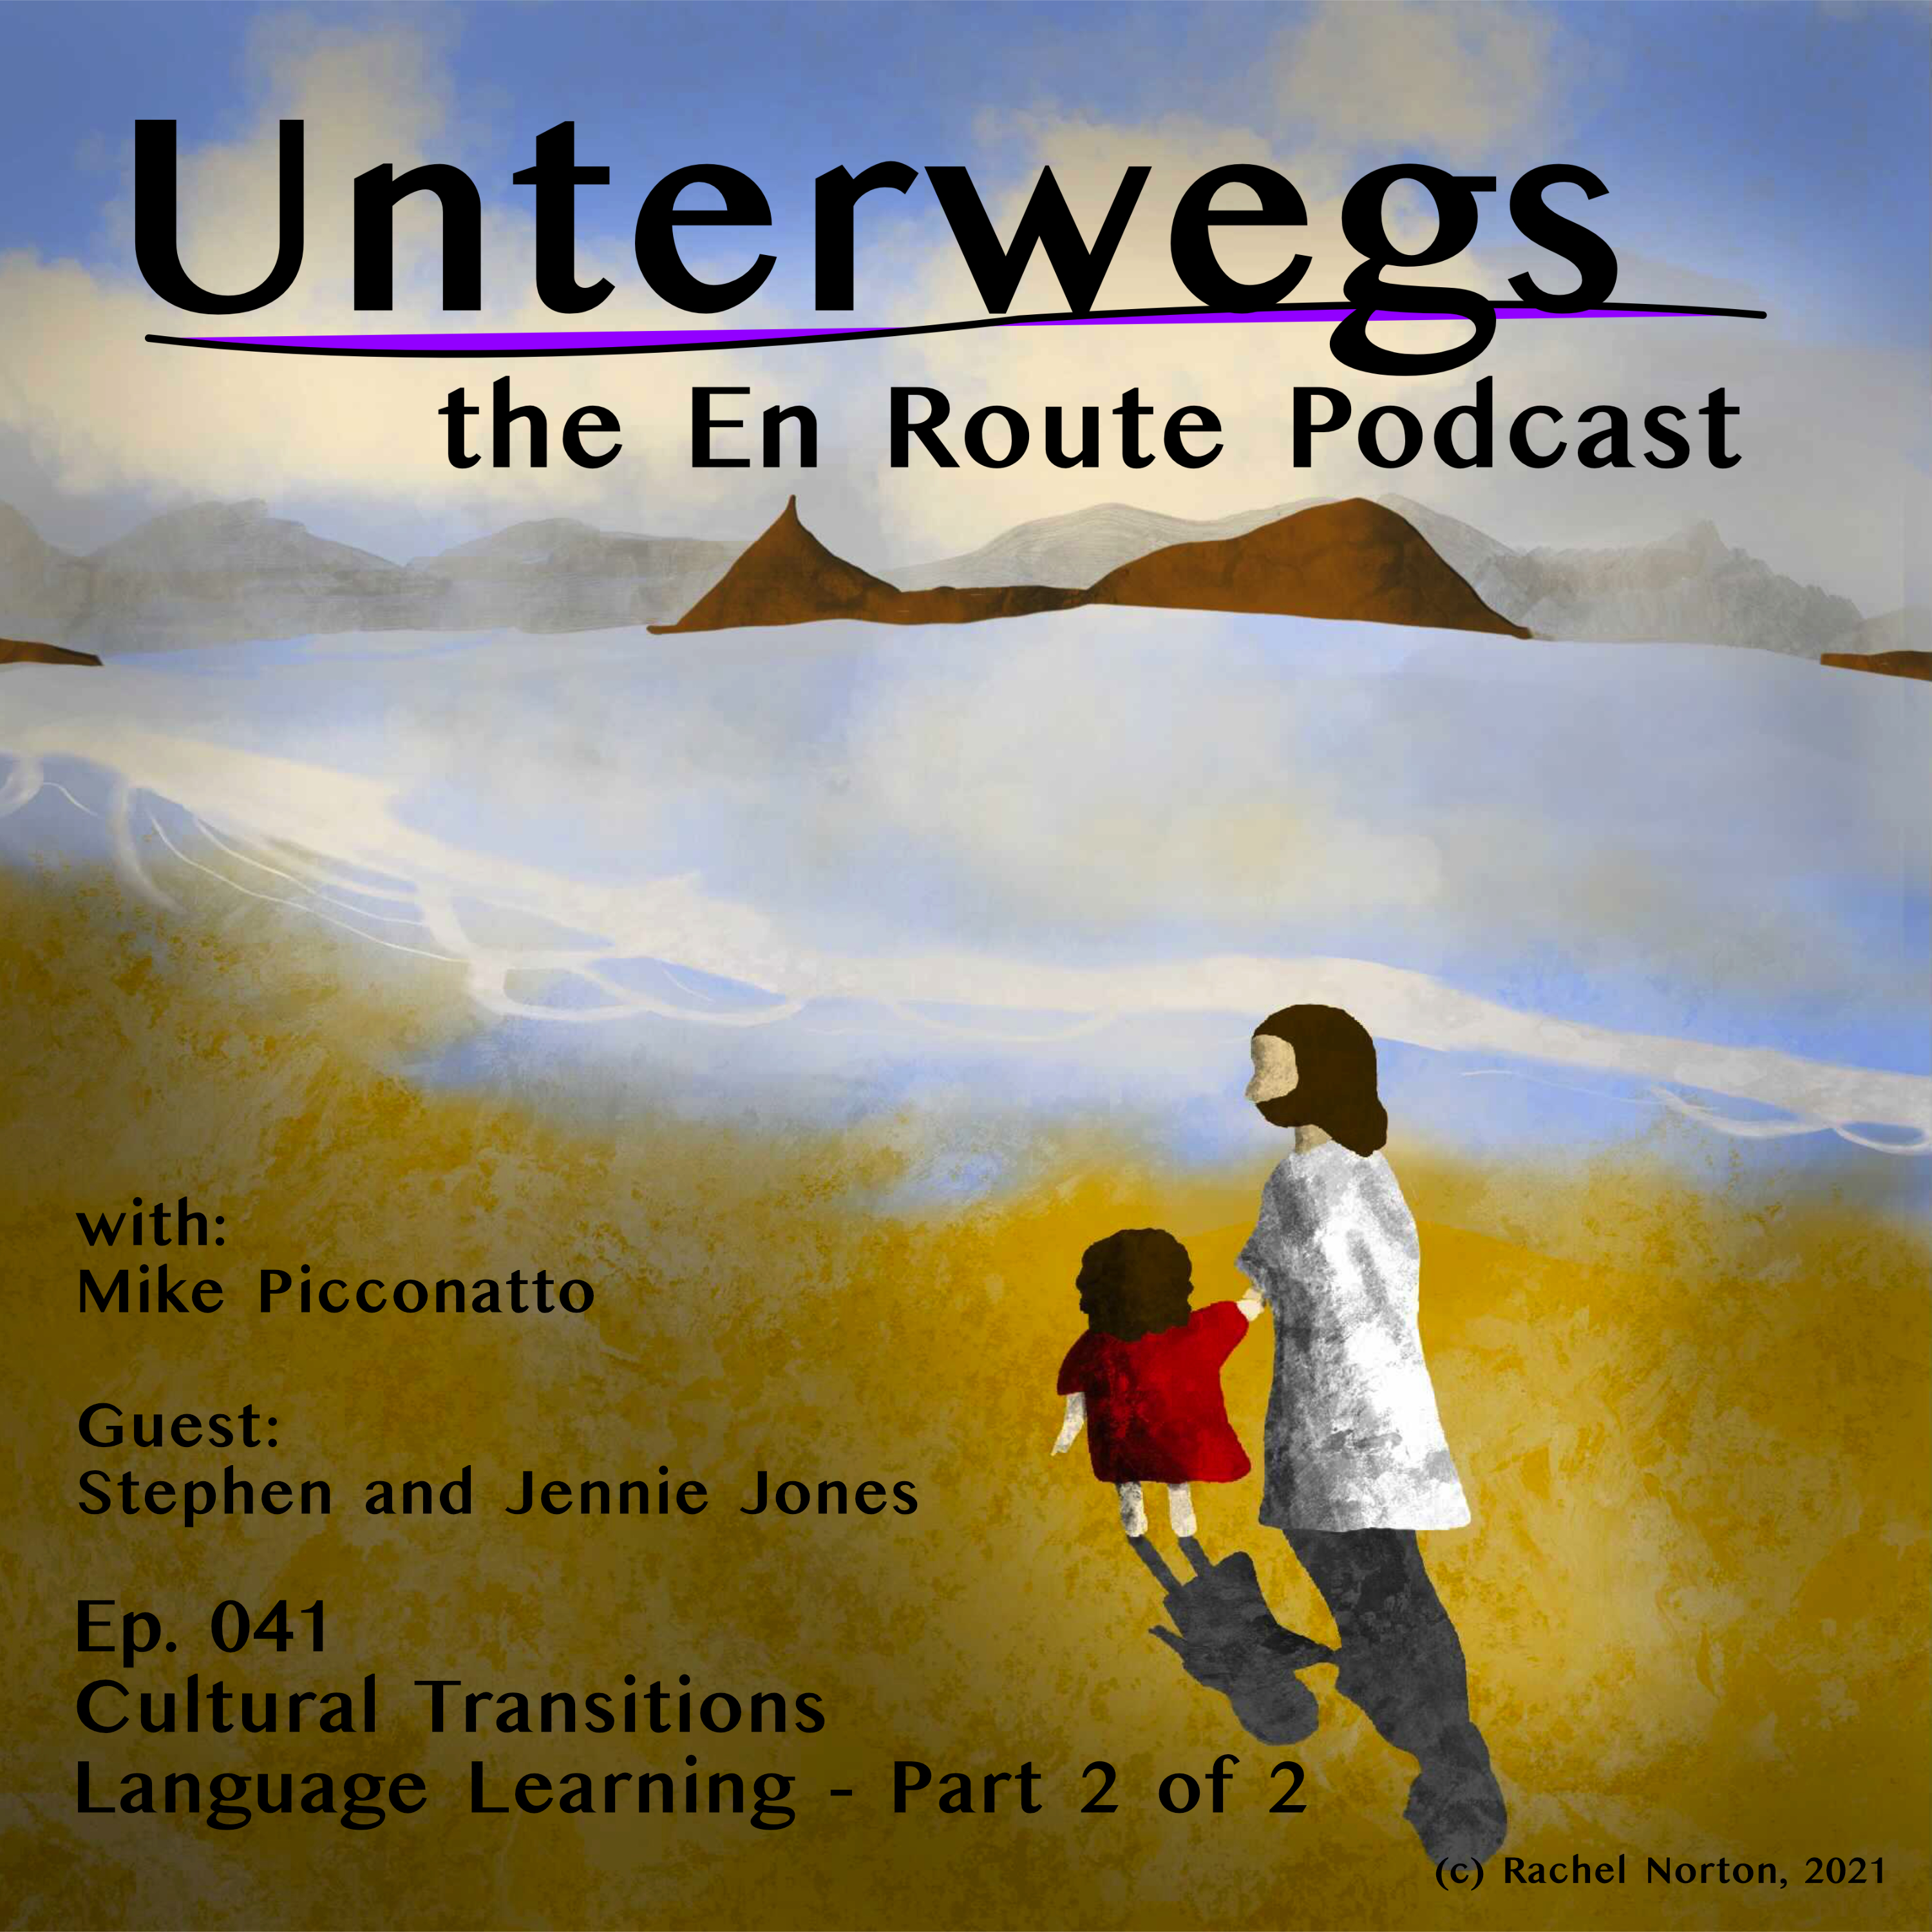 Episode 41 - Cultural Transitions - Language Learning - Part 2 of 2 